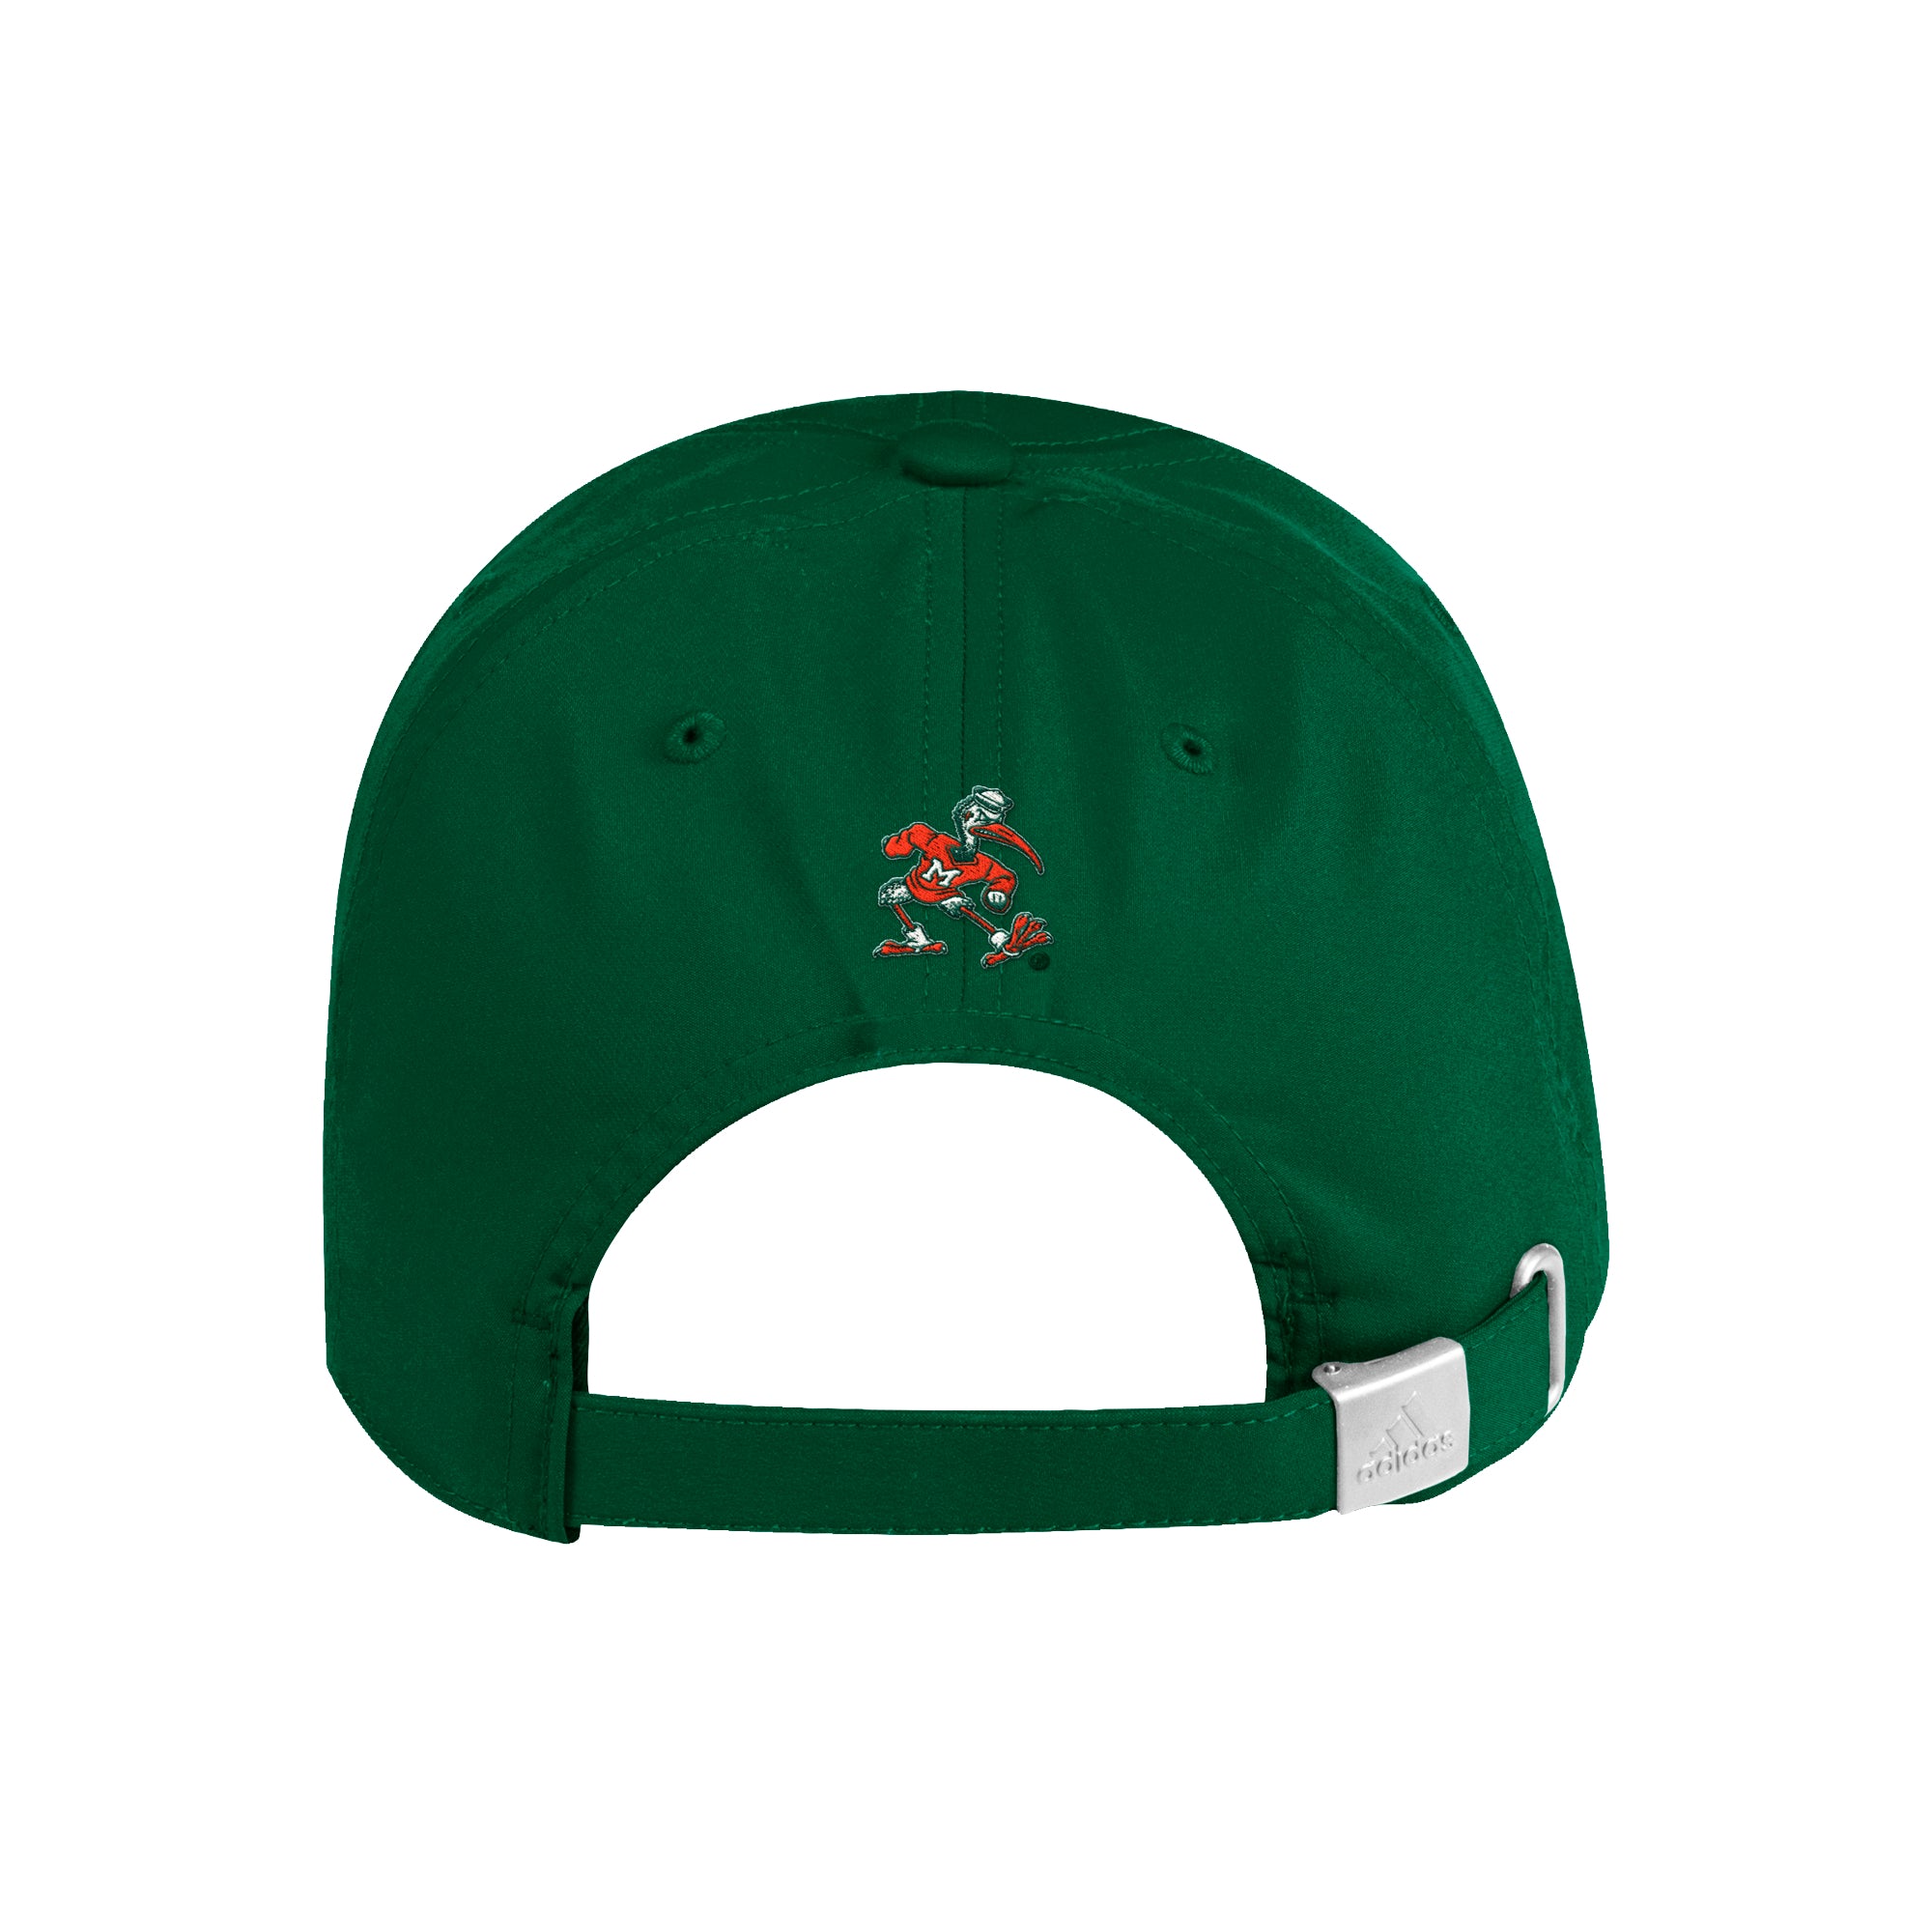 Miami Hurricanes adidas Coaches Slouch Adjustable Hat - Green